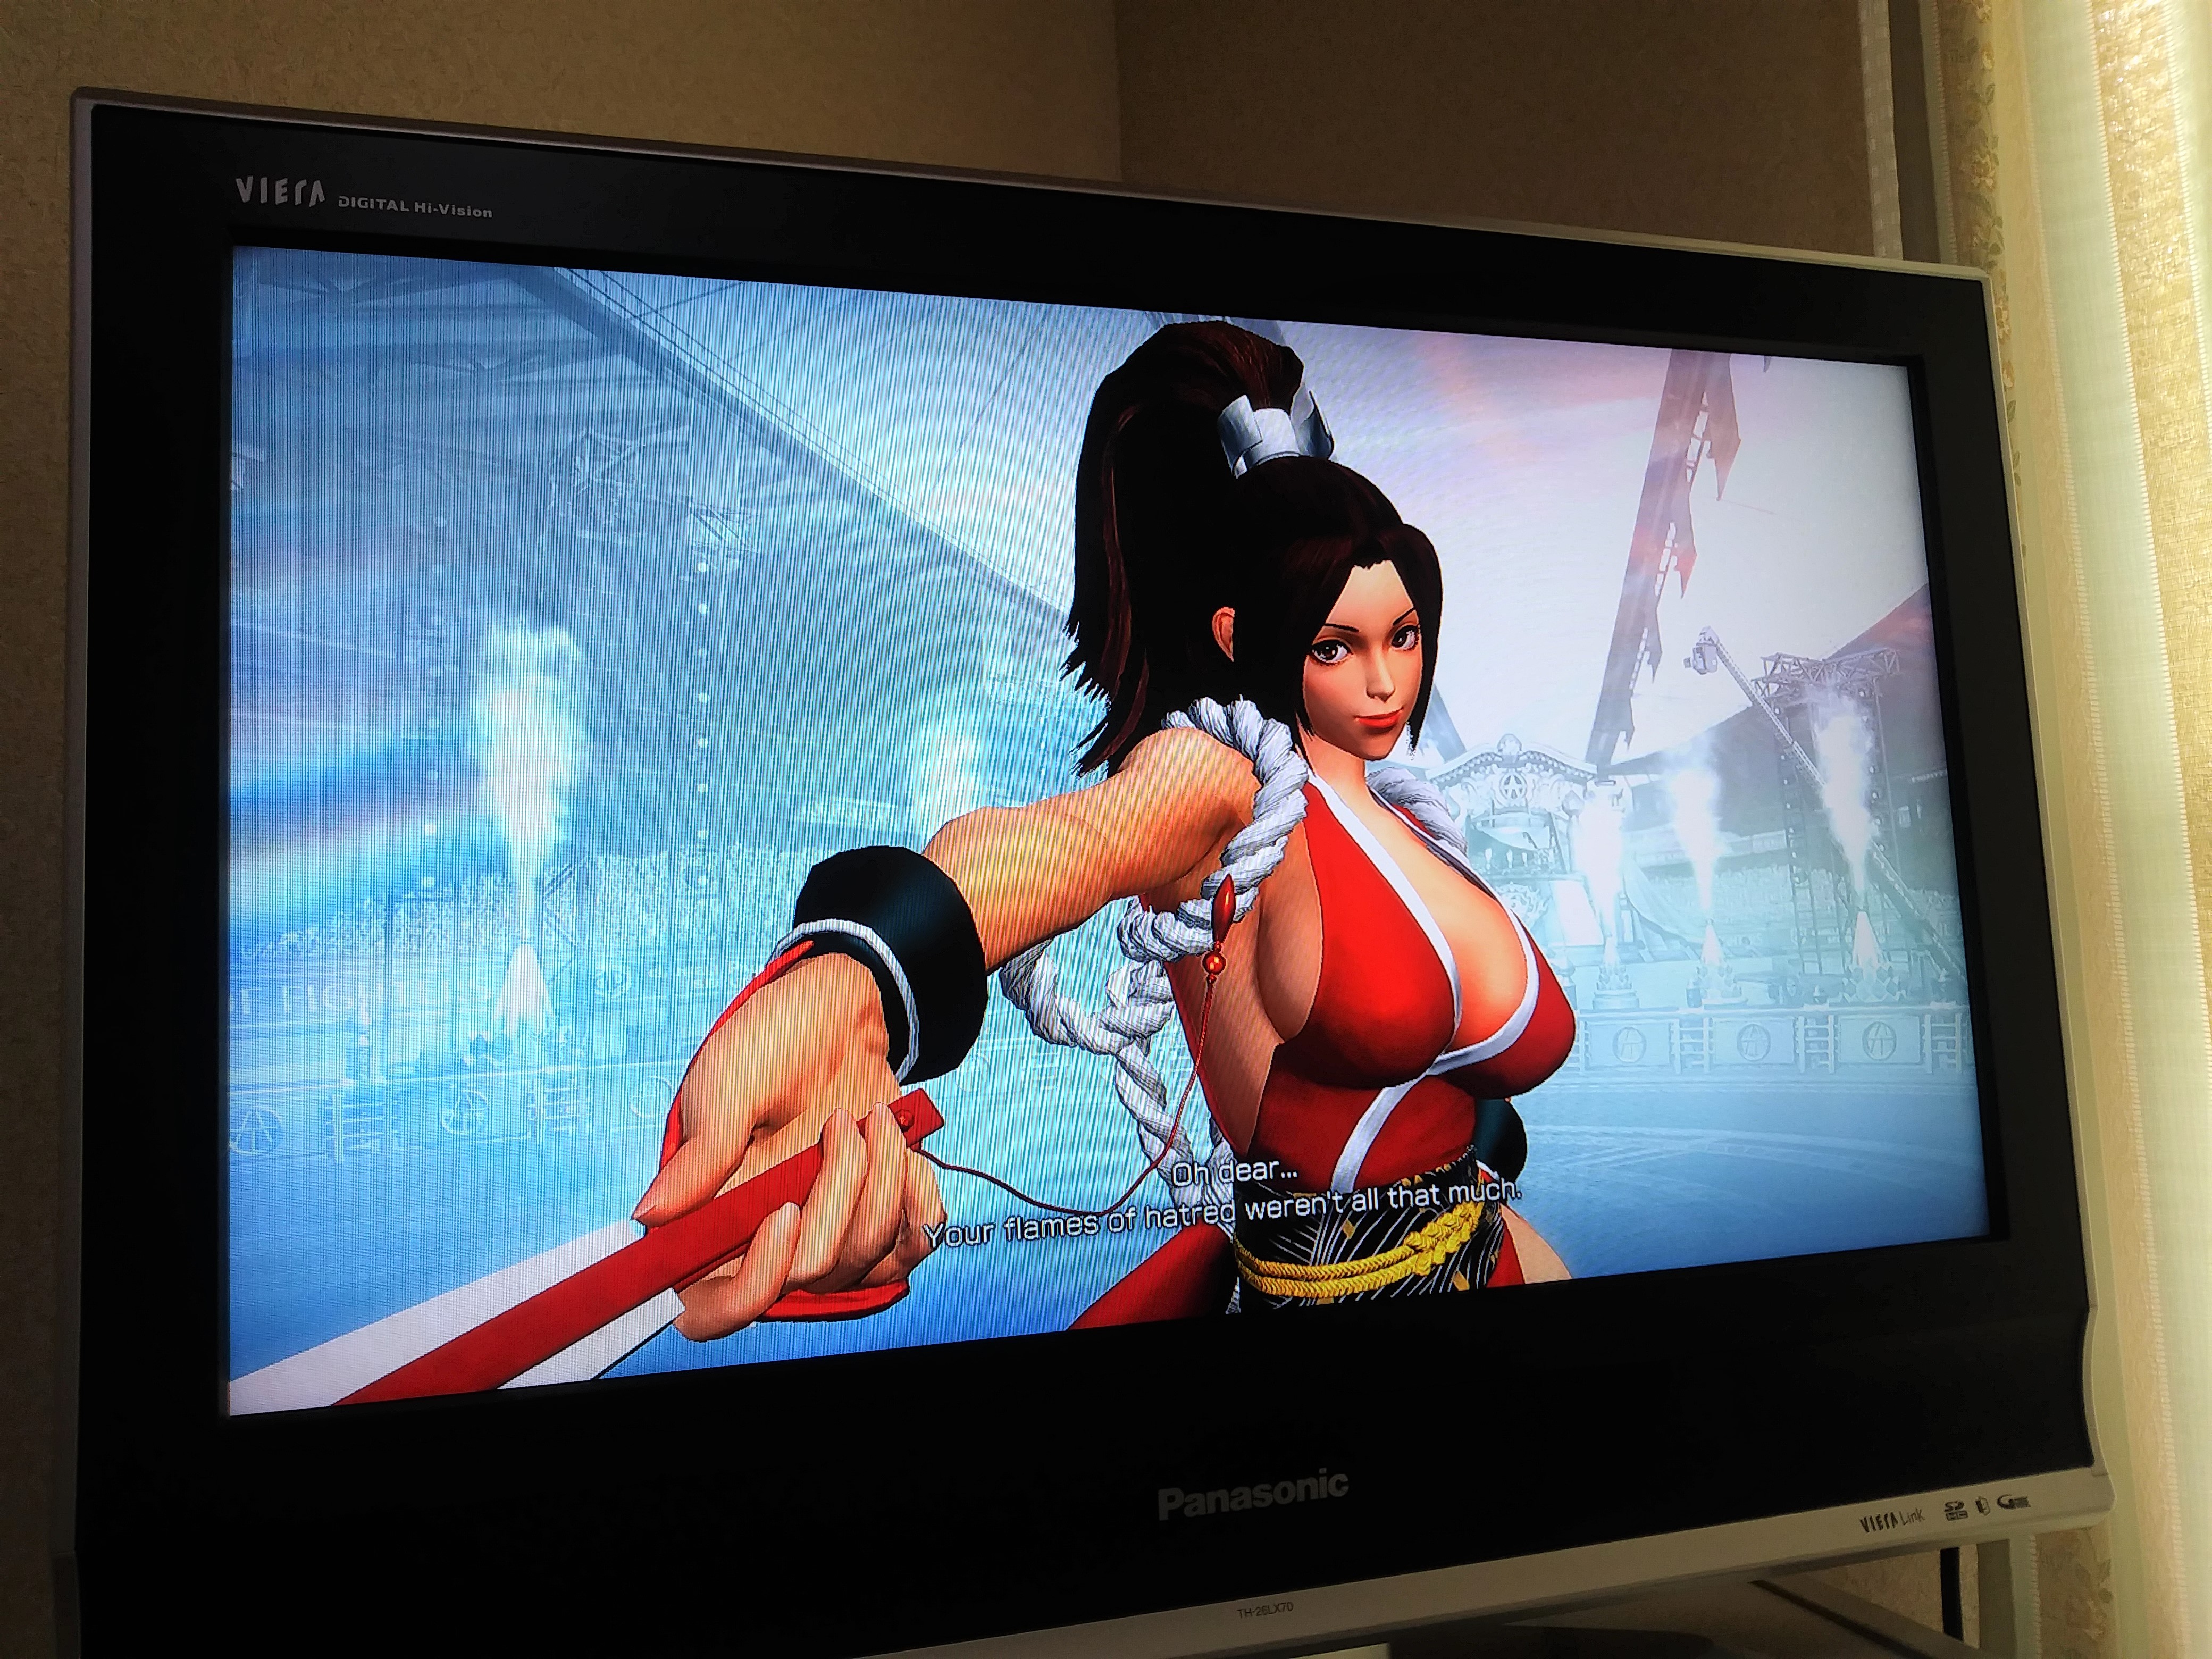 Large-breasted female fighting game character barred from